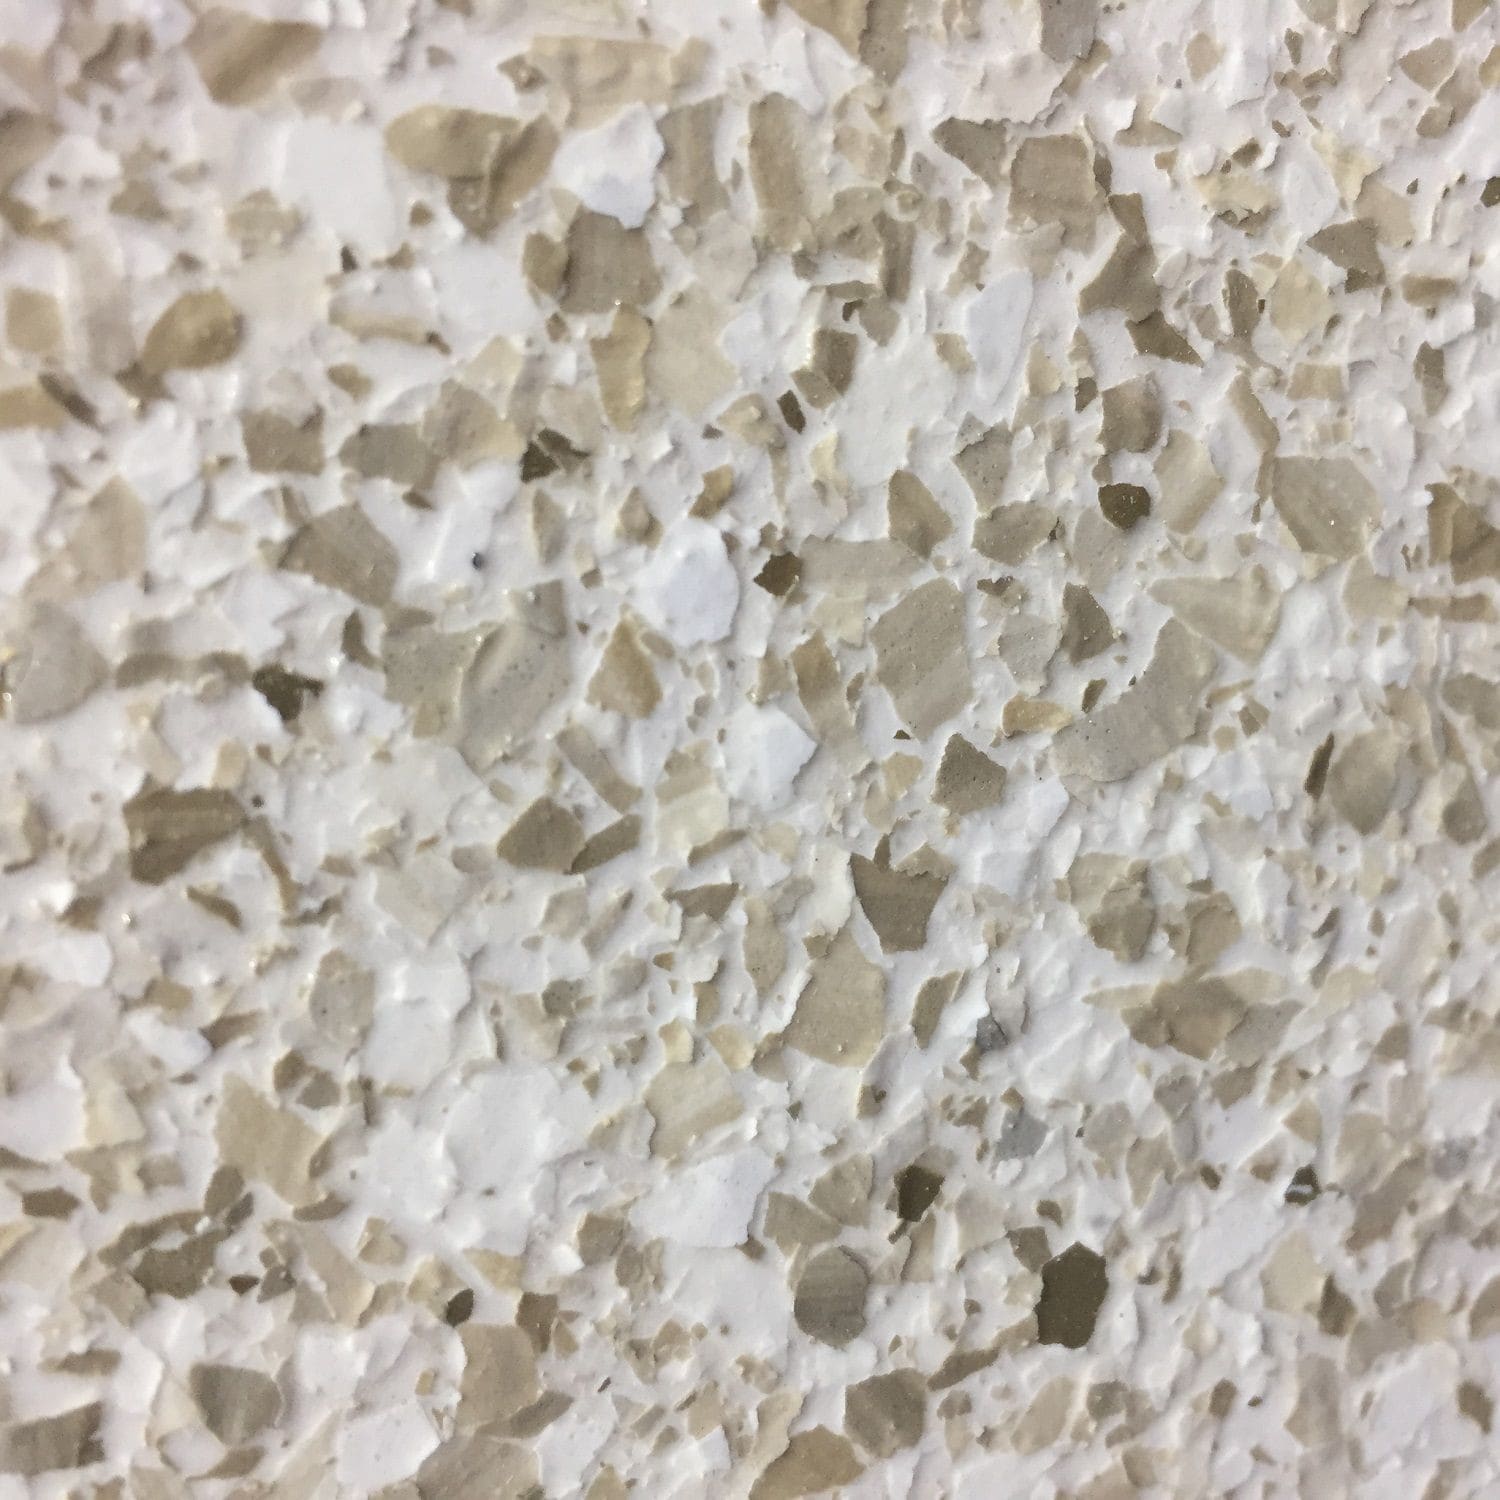 This range of flake is standardly available in Large or Small